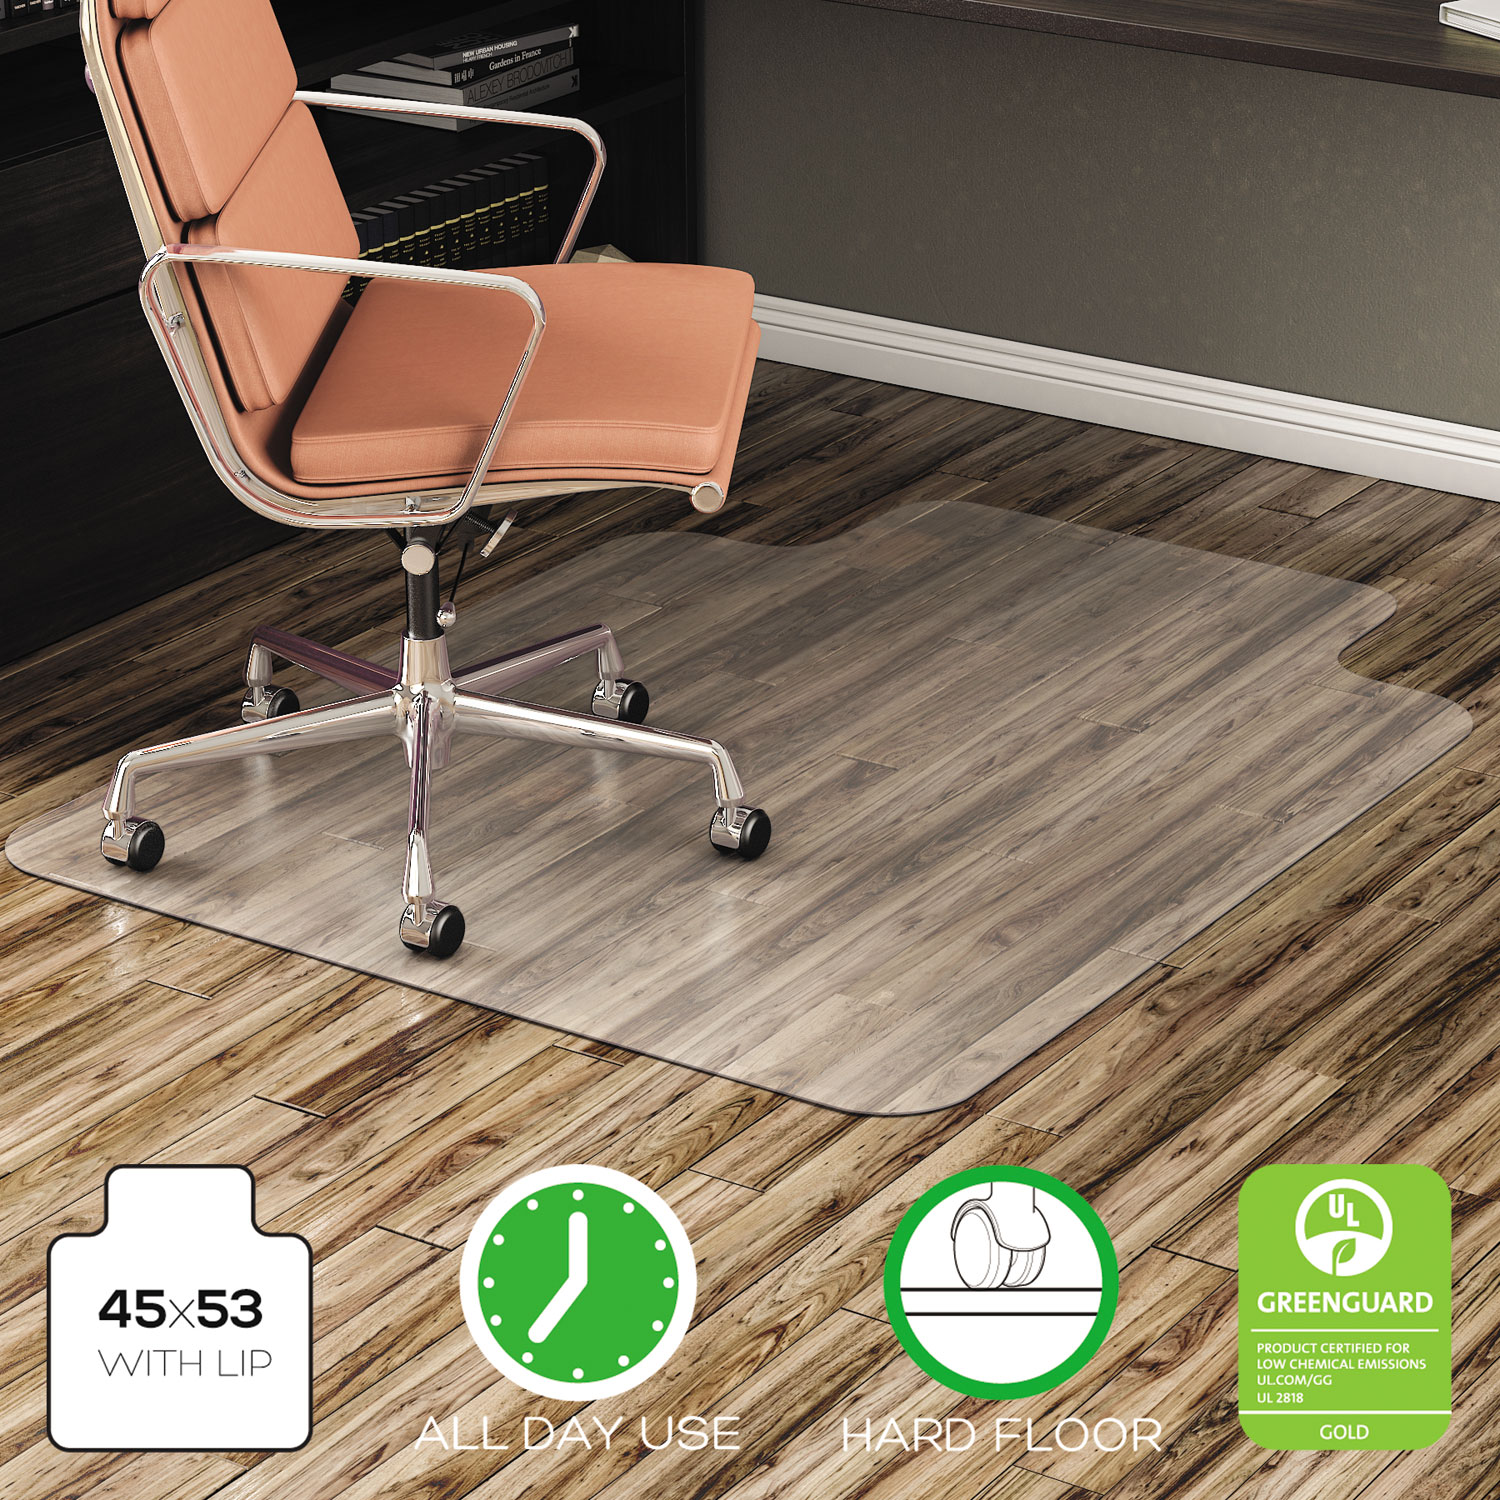  deflecto CM21232 EconoMat All Day Use Chair Mat for Hard Floors, 45 x 53, Wide Lipped, Clear (DEFCM21232) 